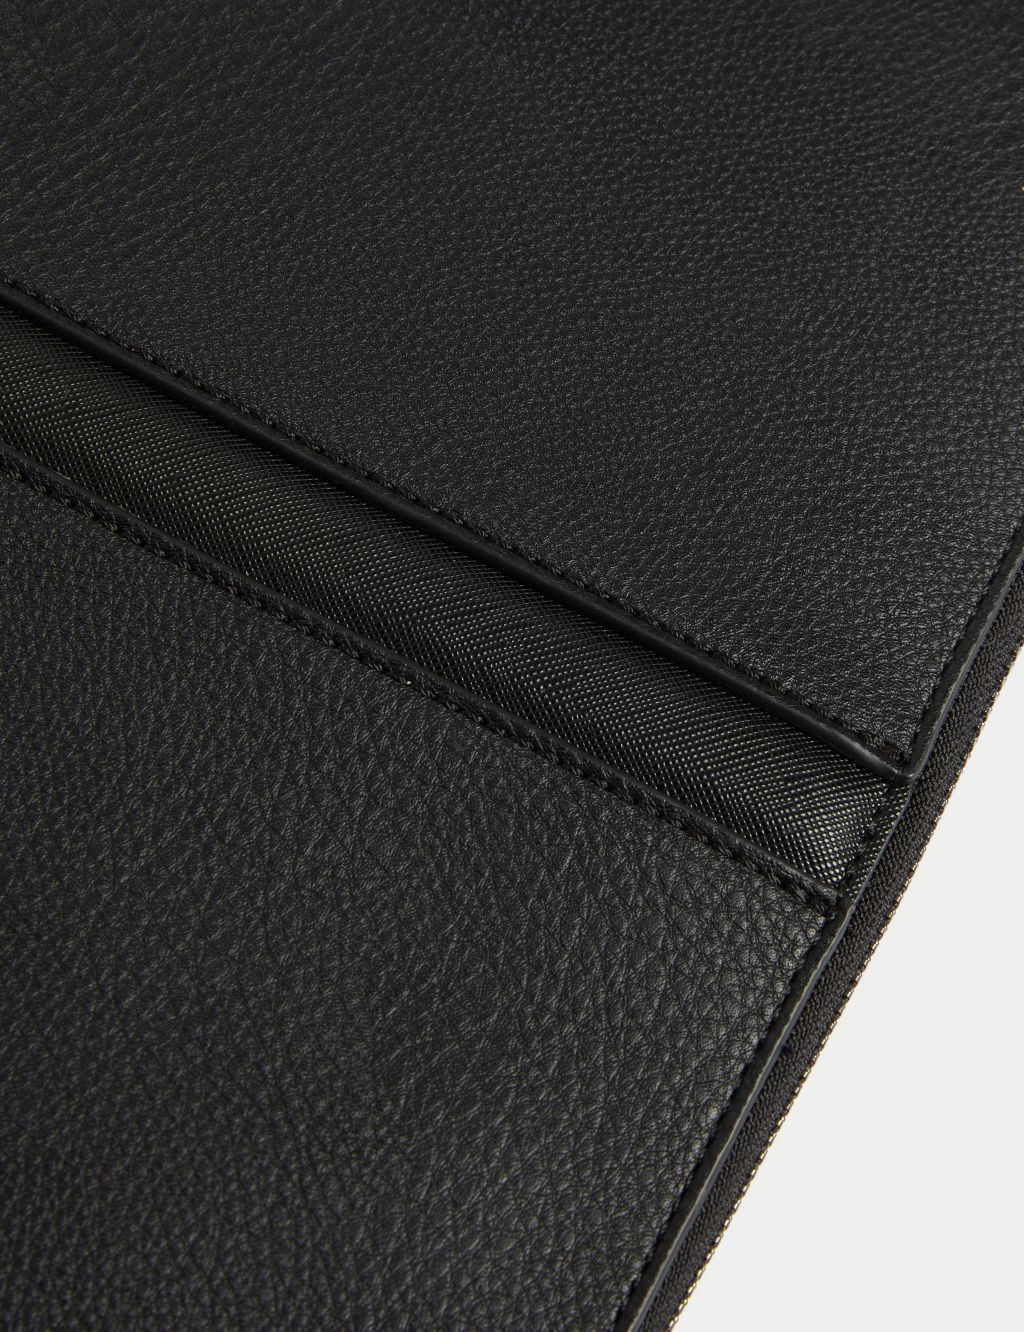 Textured Laptop Sleeve | M&S Collection | M&S